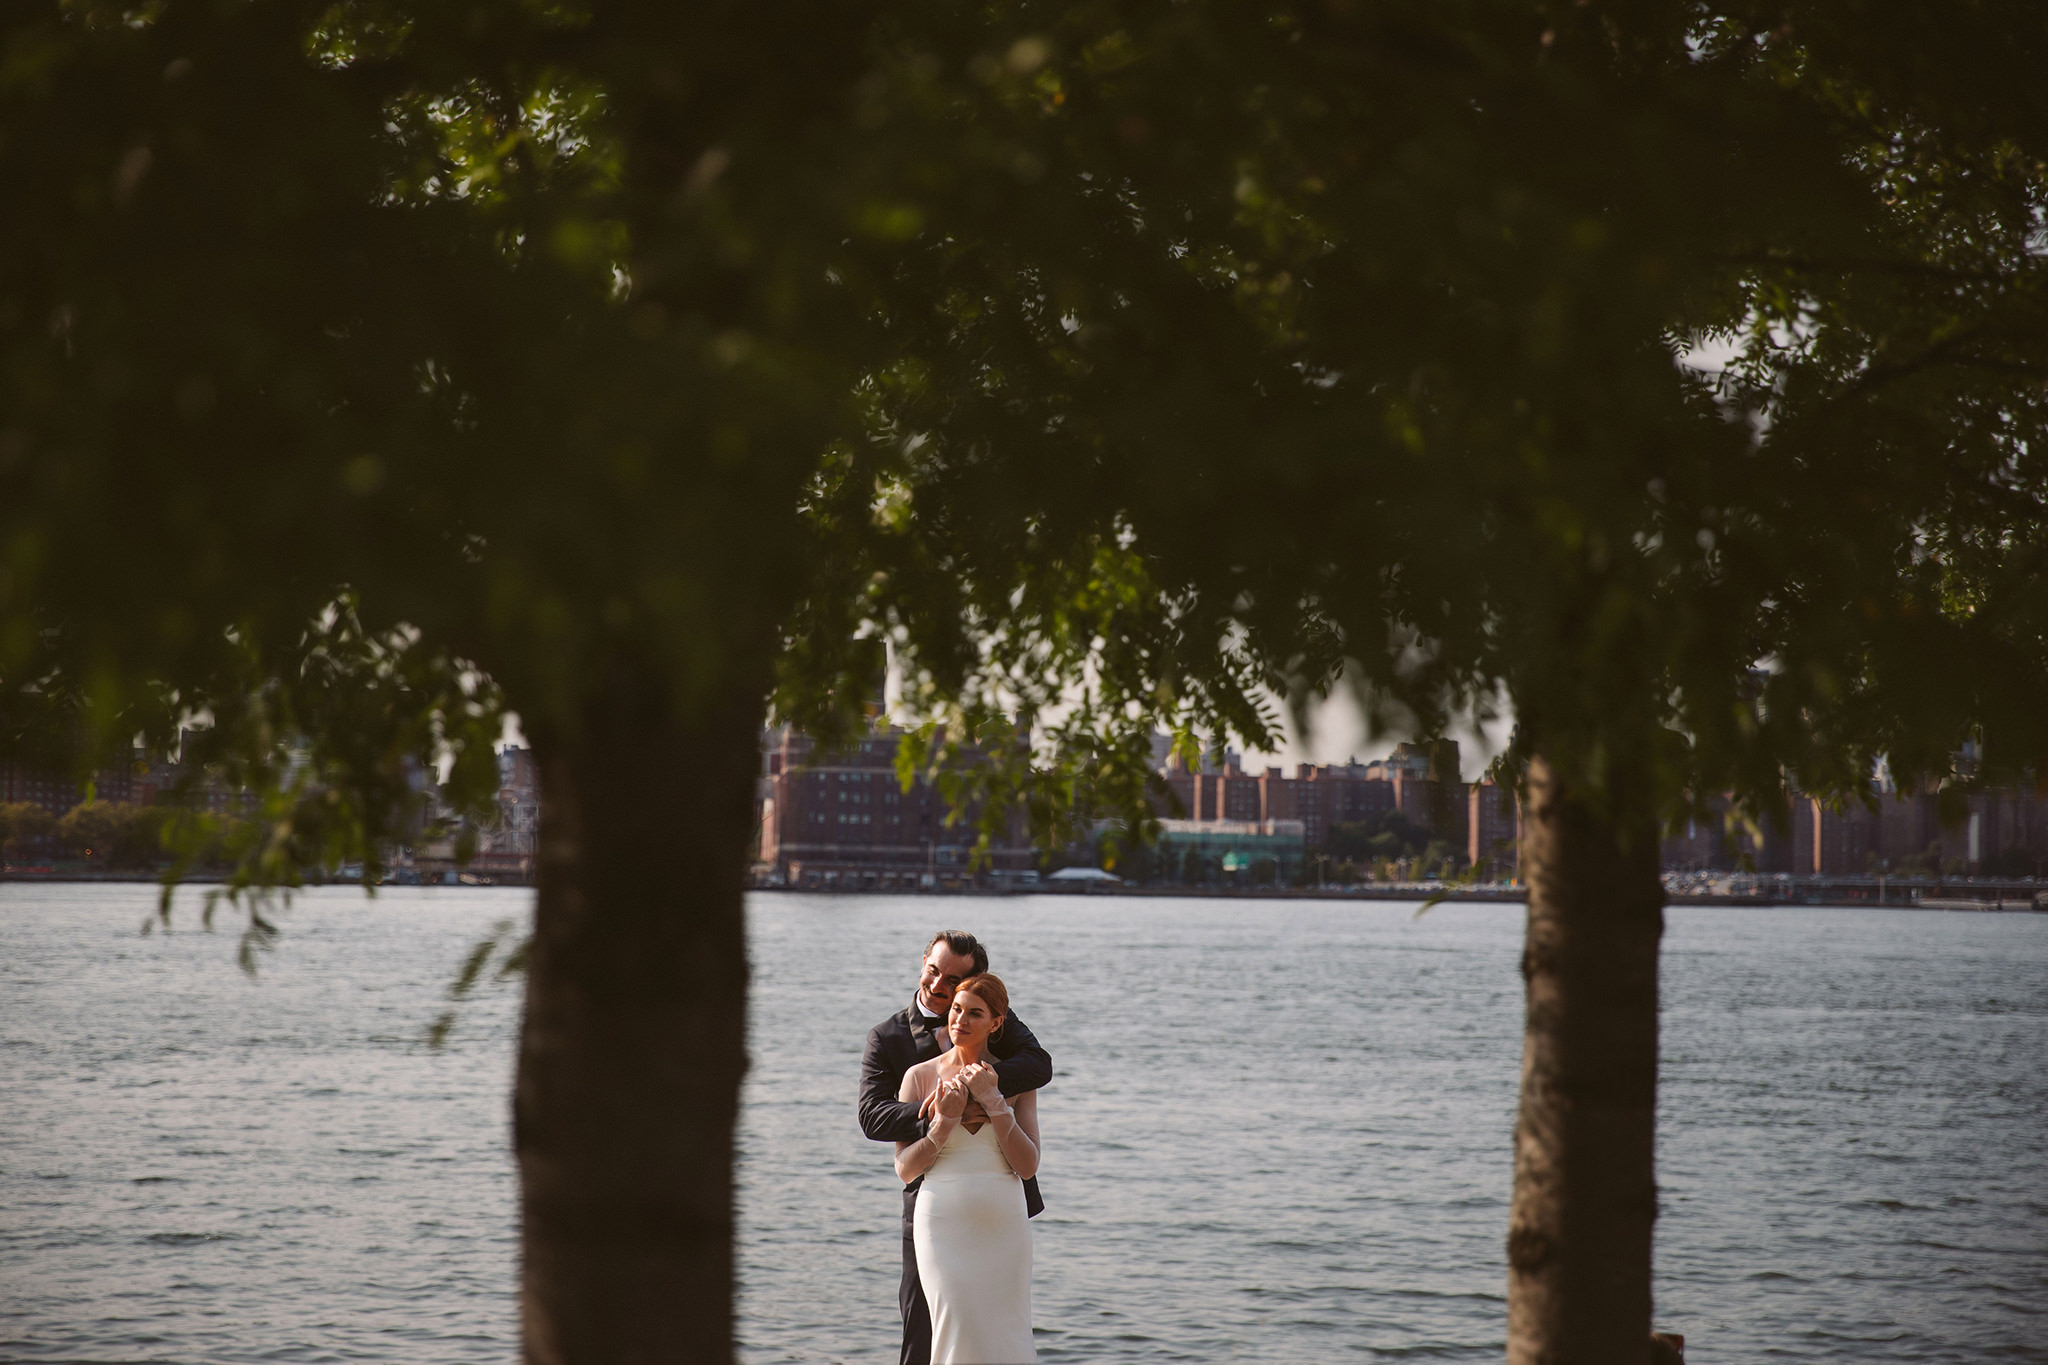 A creative city wedding photo with trees in Williamsburg